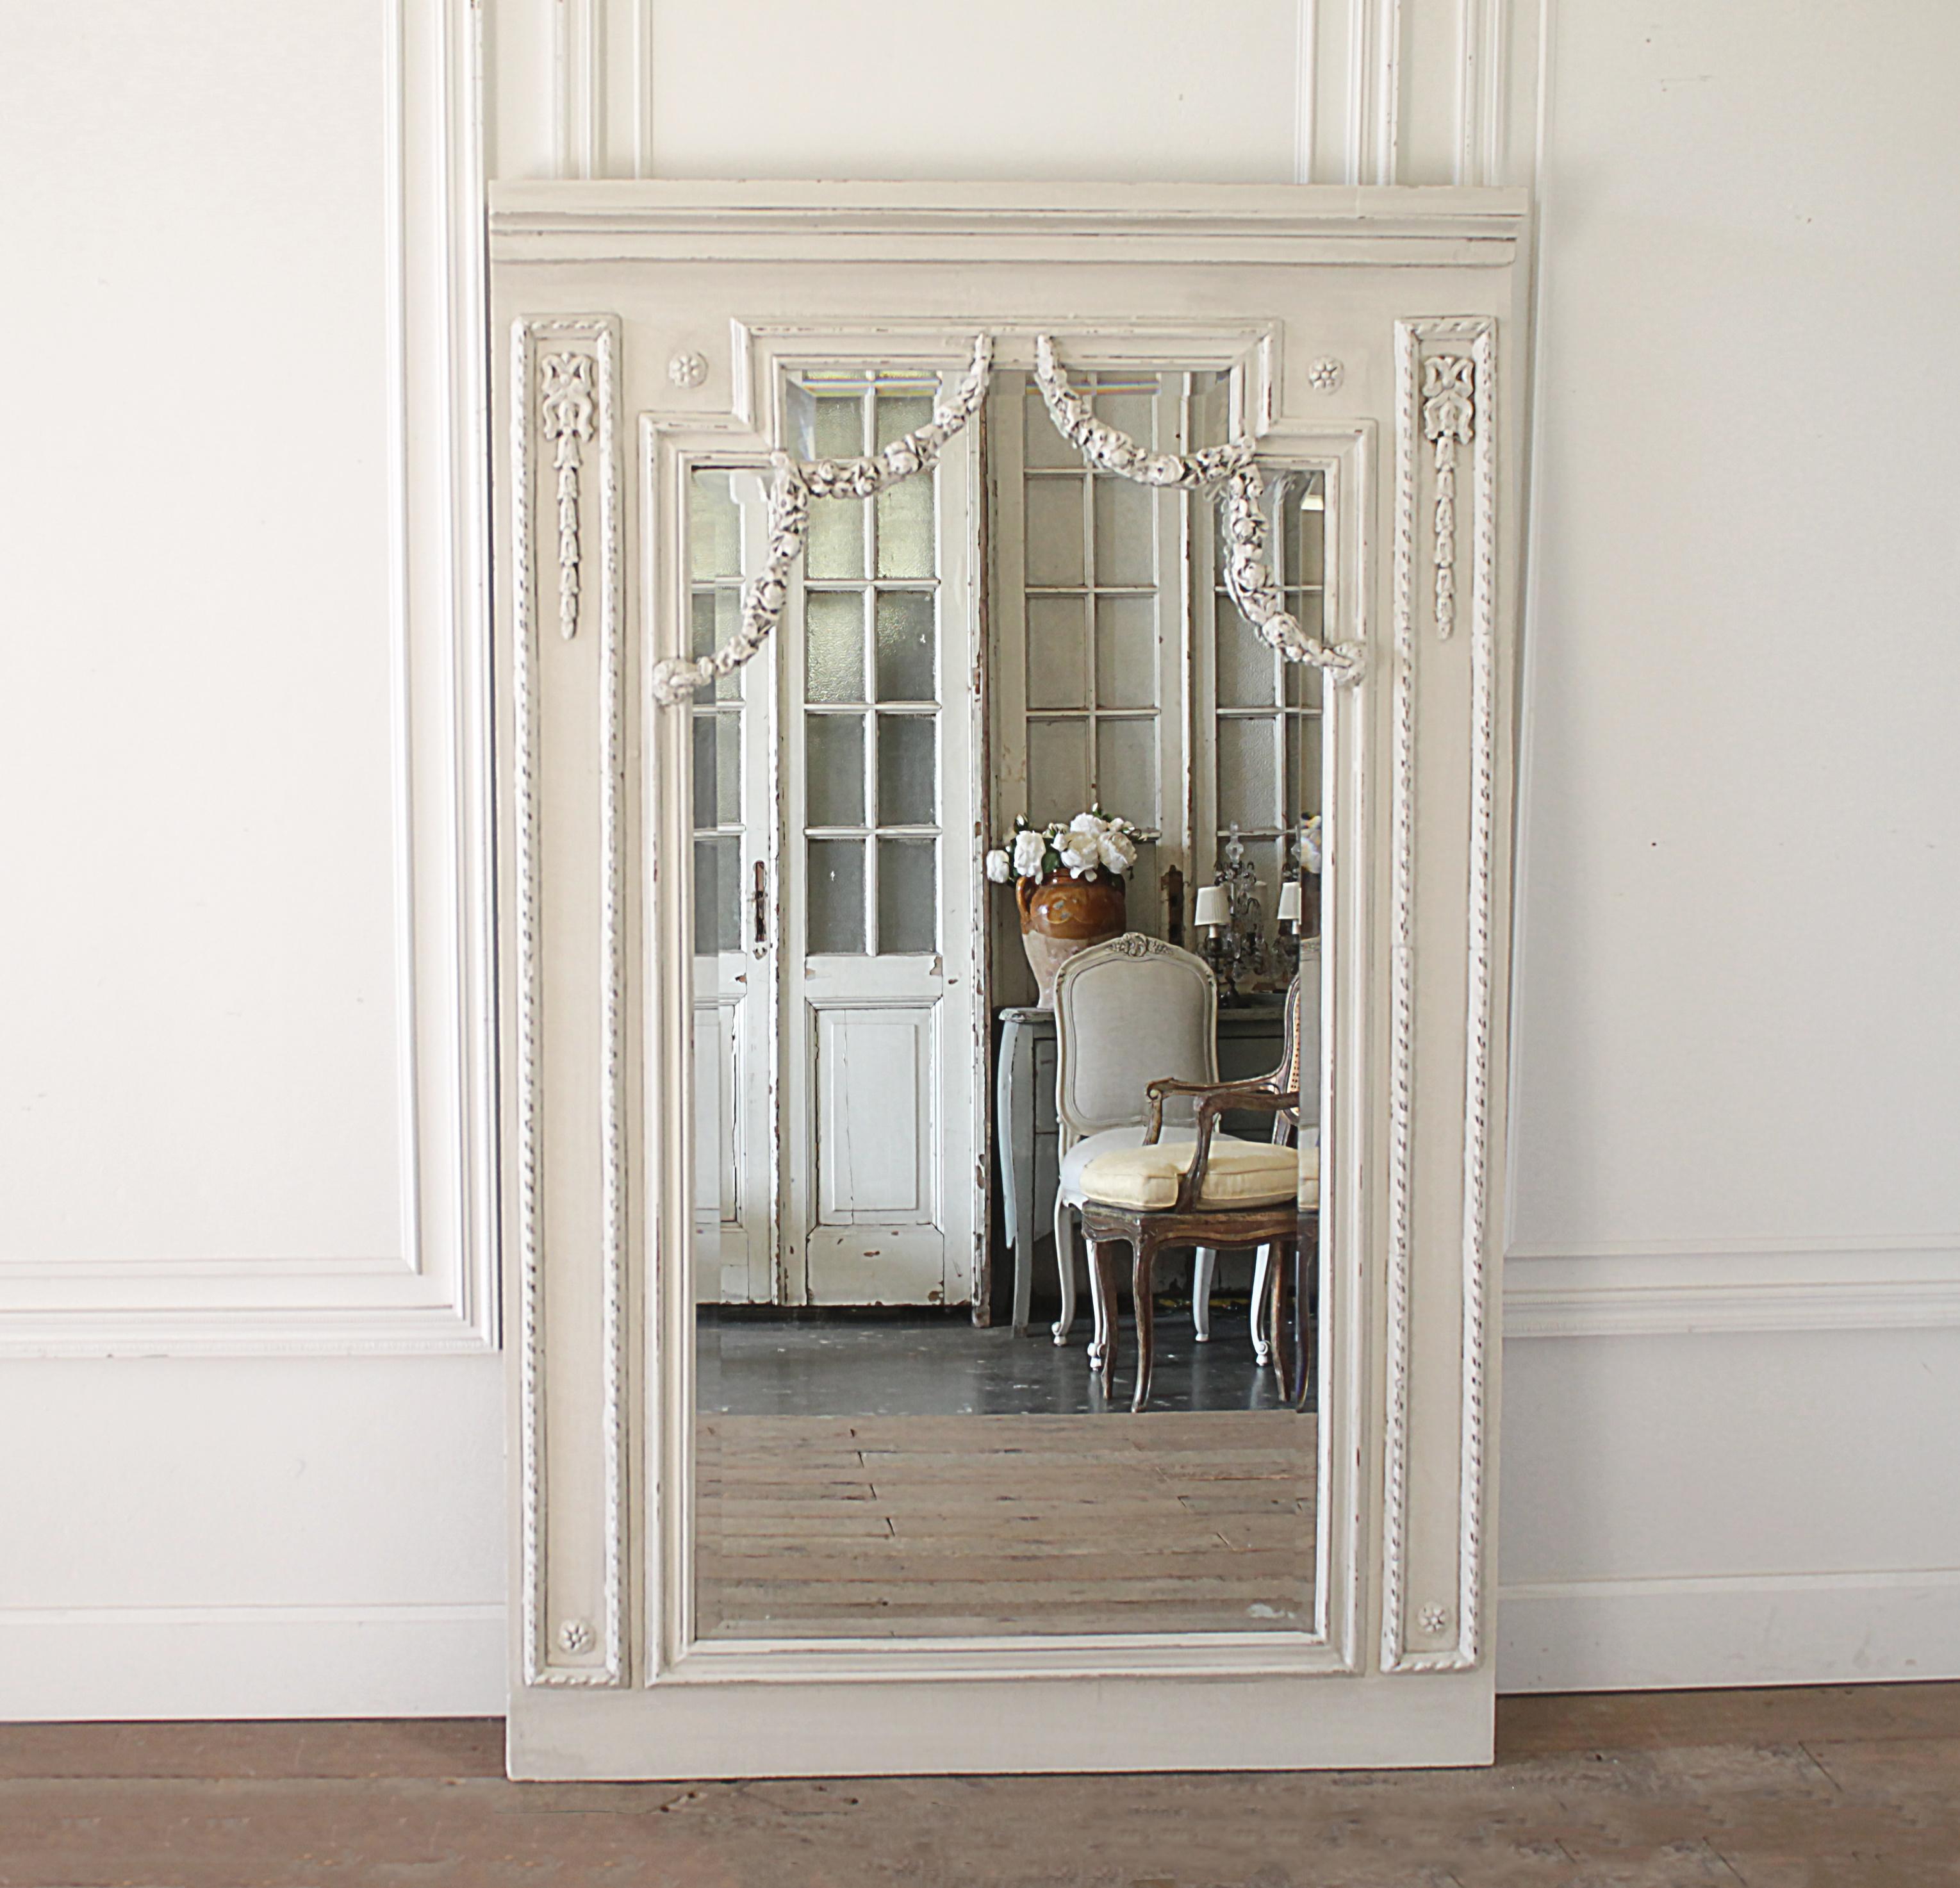 20th century wood Trumeau style carved and painted mirror
Painted in our signature oyster white finish, with subtle distressed edges and finished with an antique glaze. This mirror has large swagging rose garlands draping down over the mirror. The